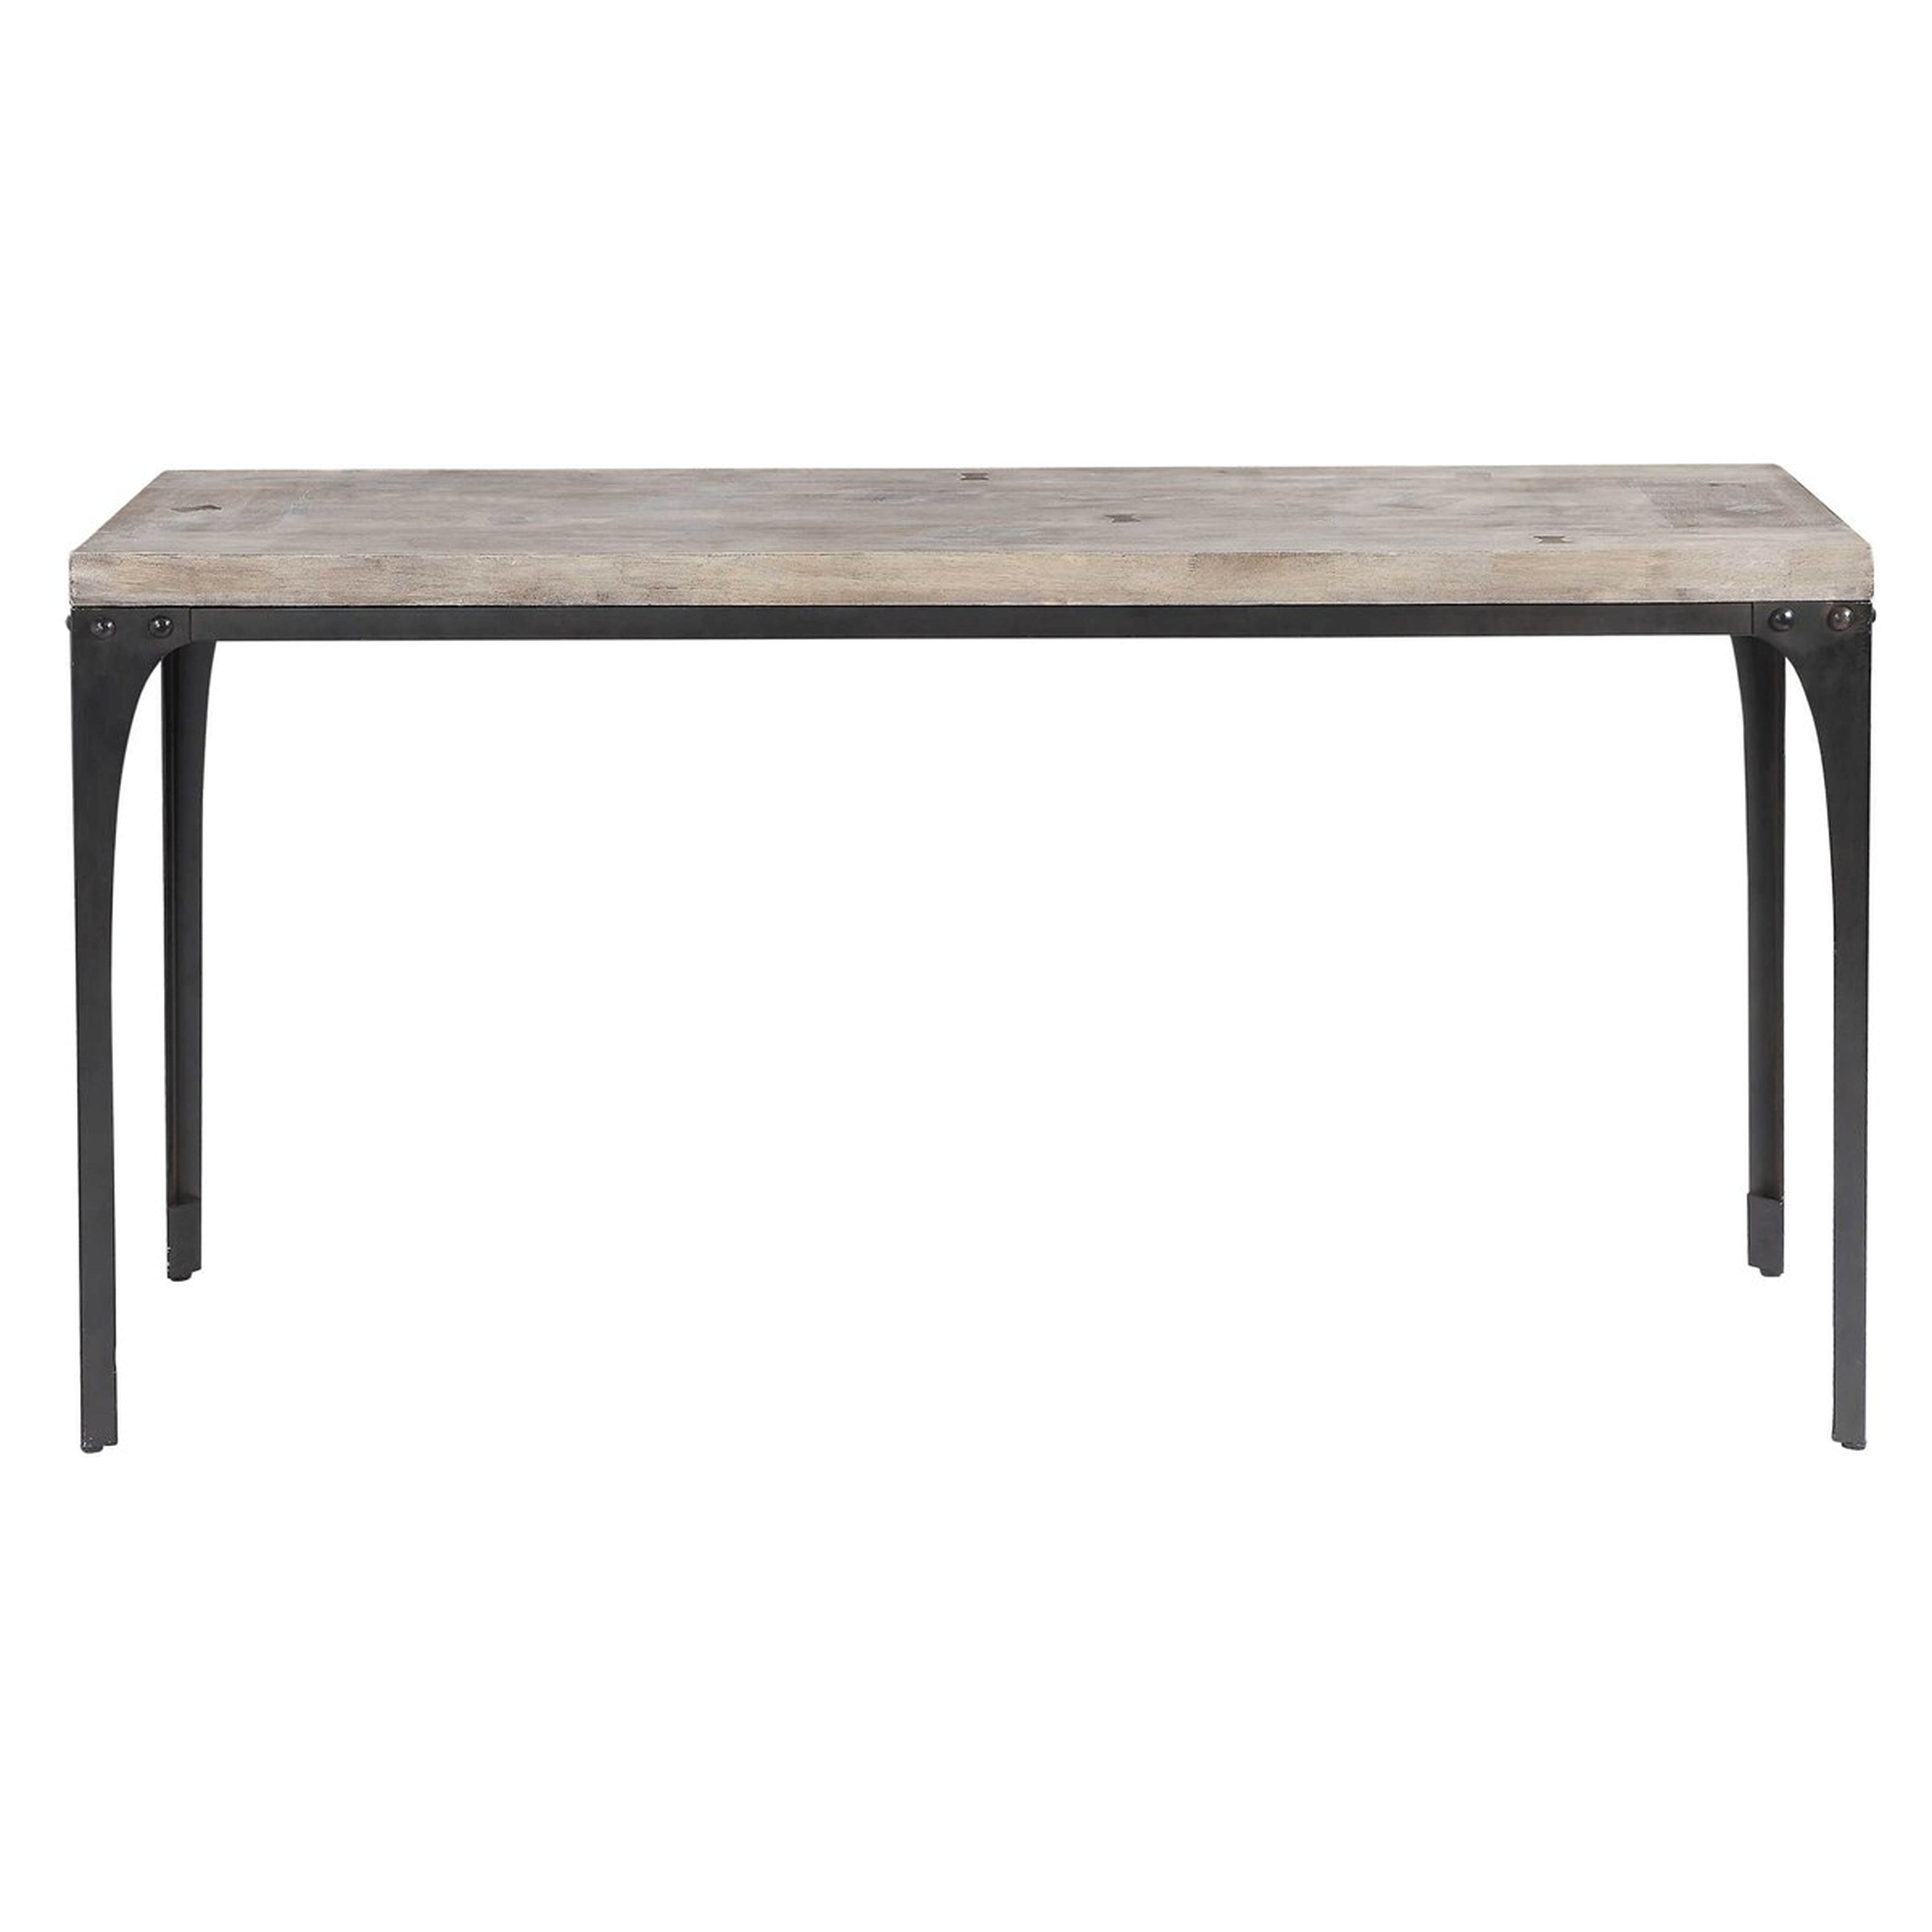 BLAYLOCK CONSOLE TABLE - Hudsonhill Foundry